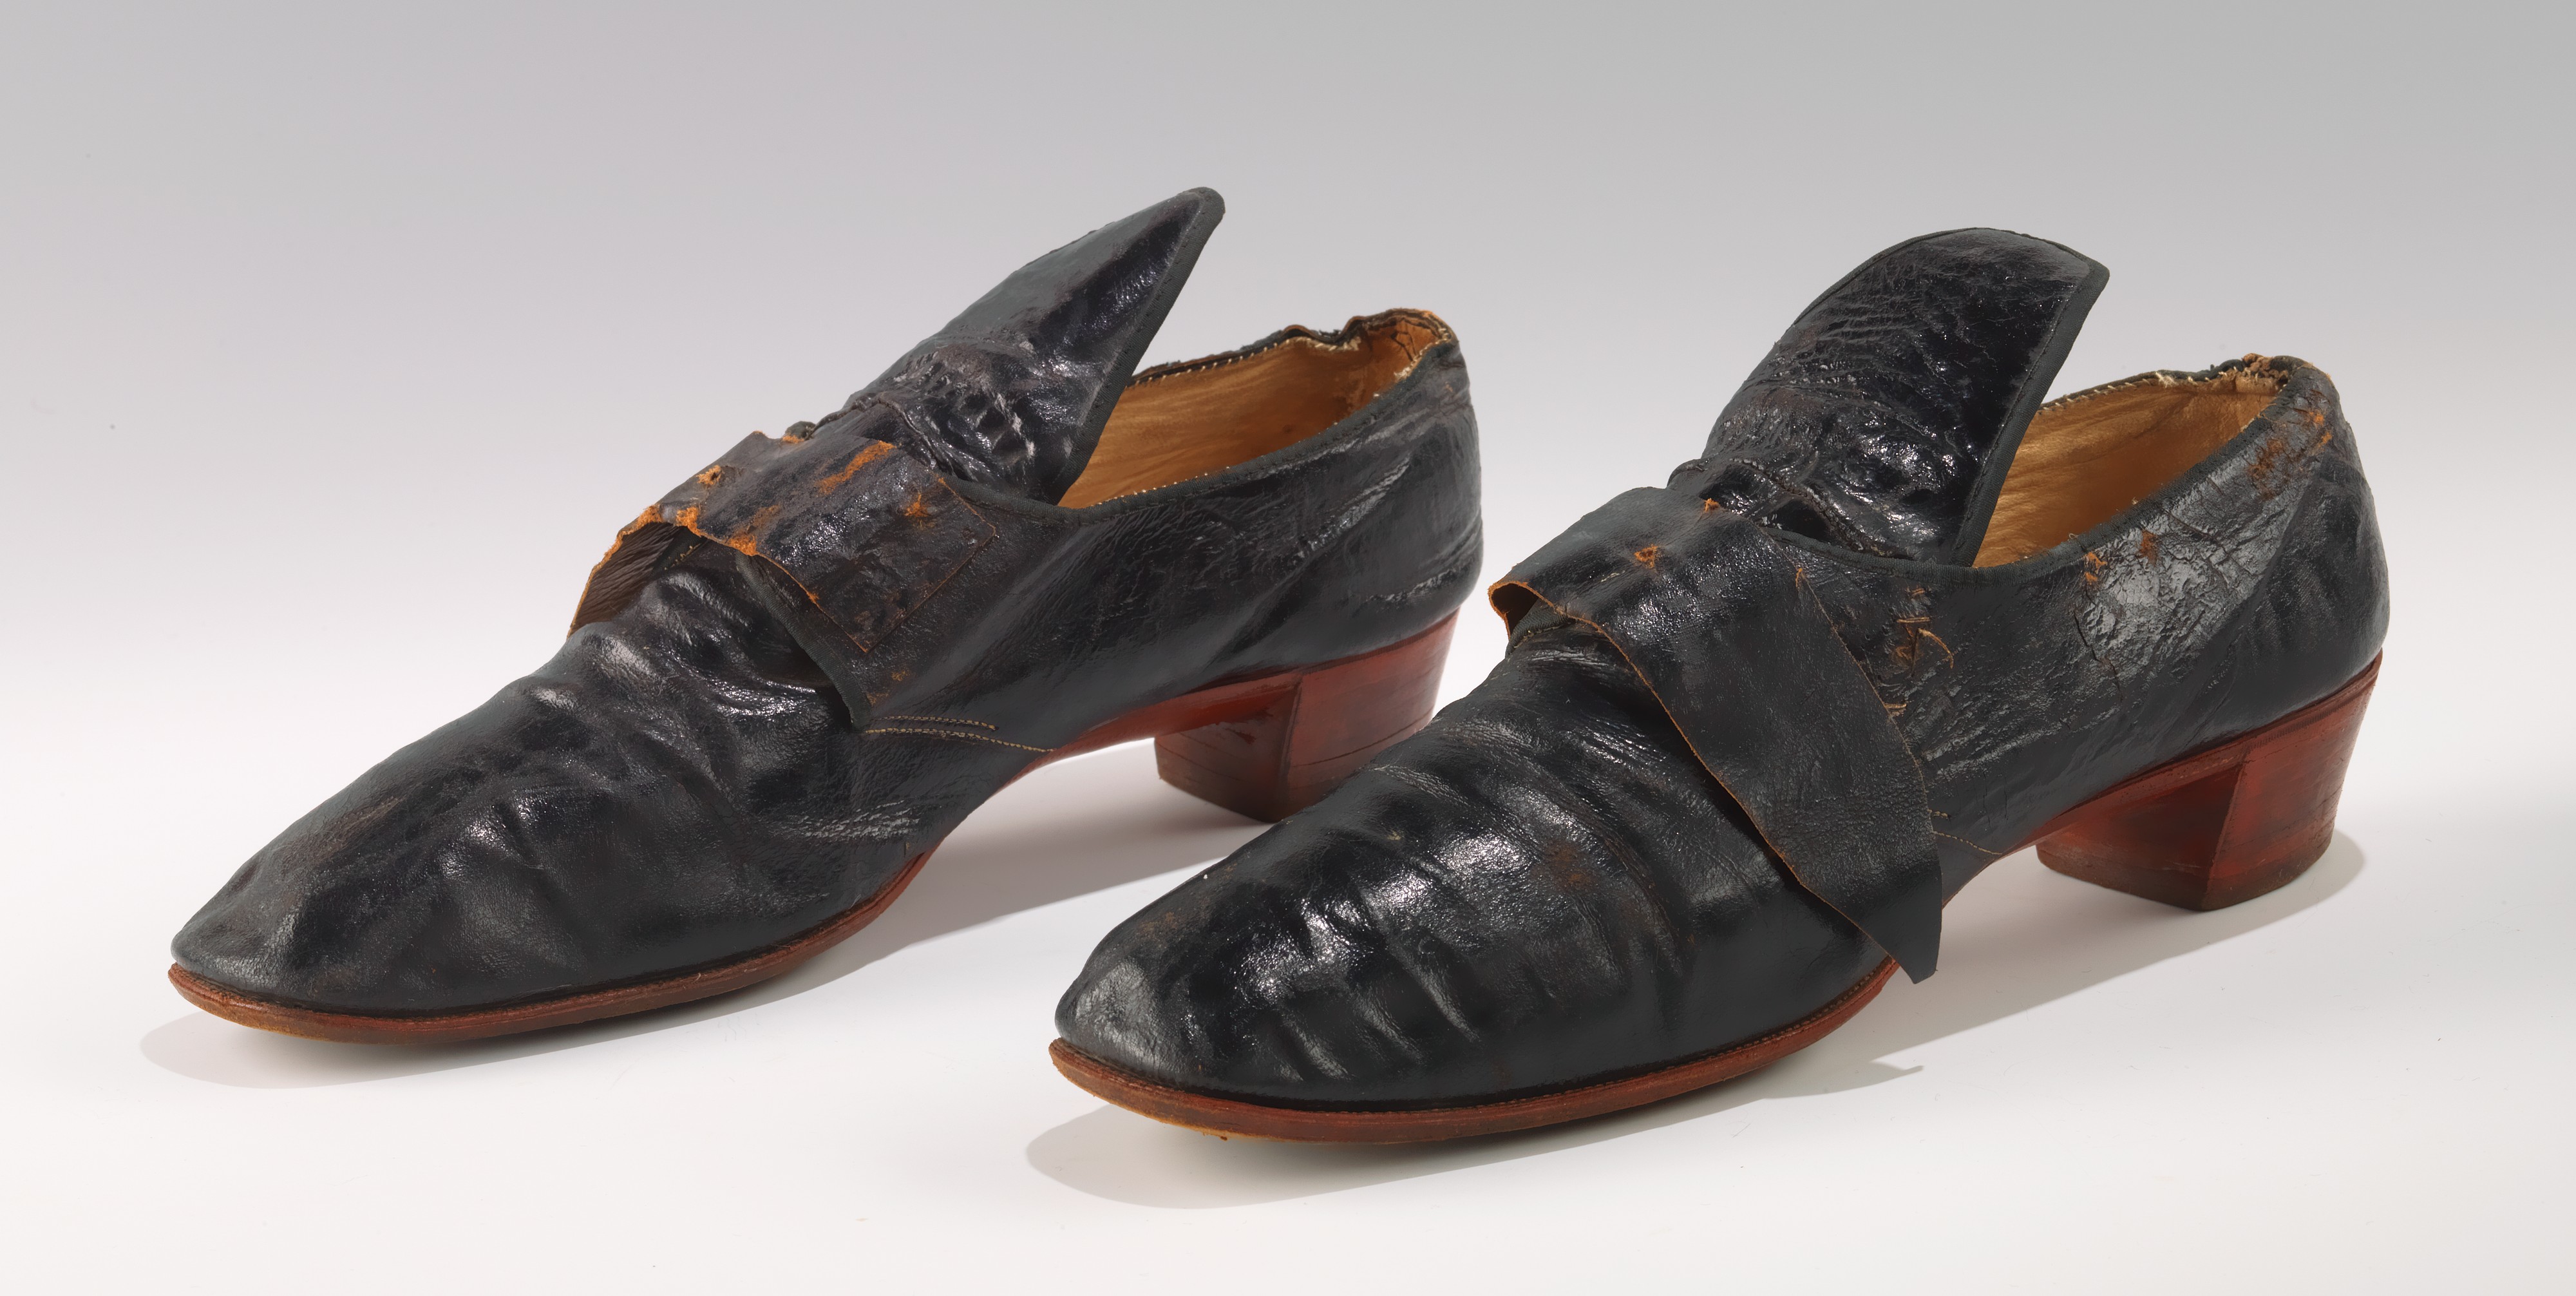 Court shoes, French